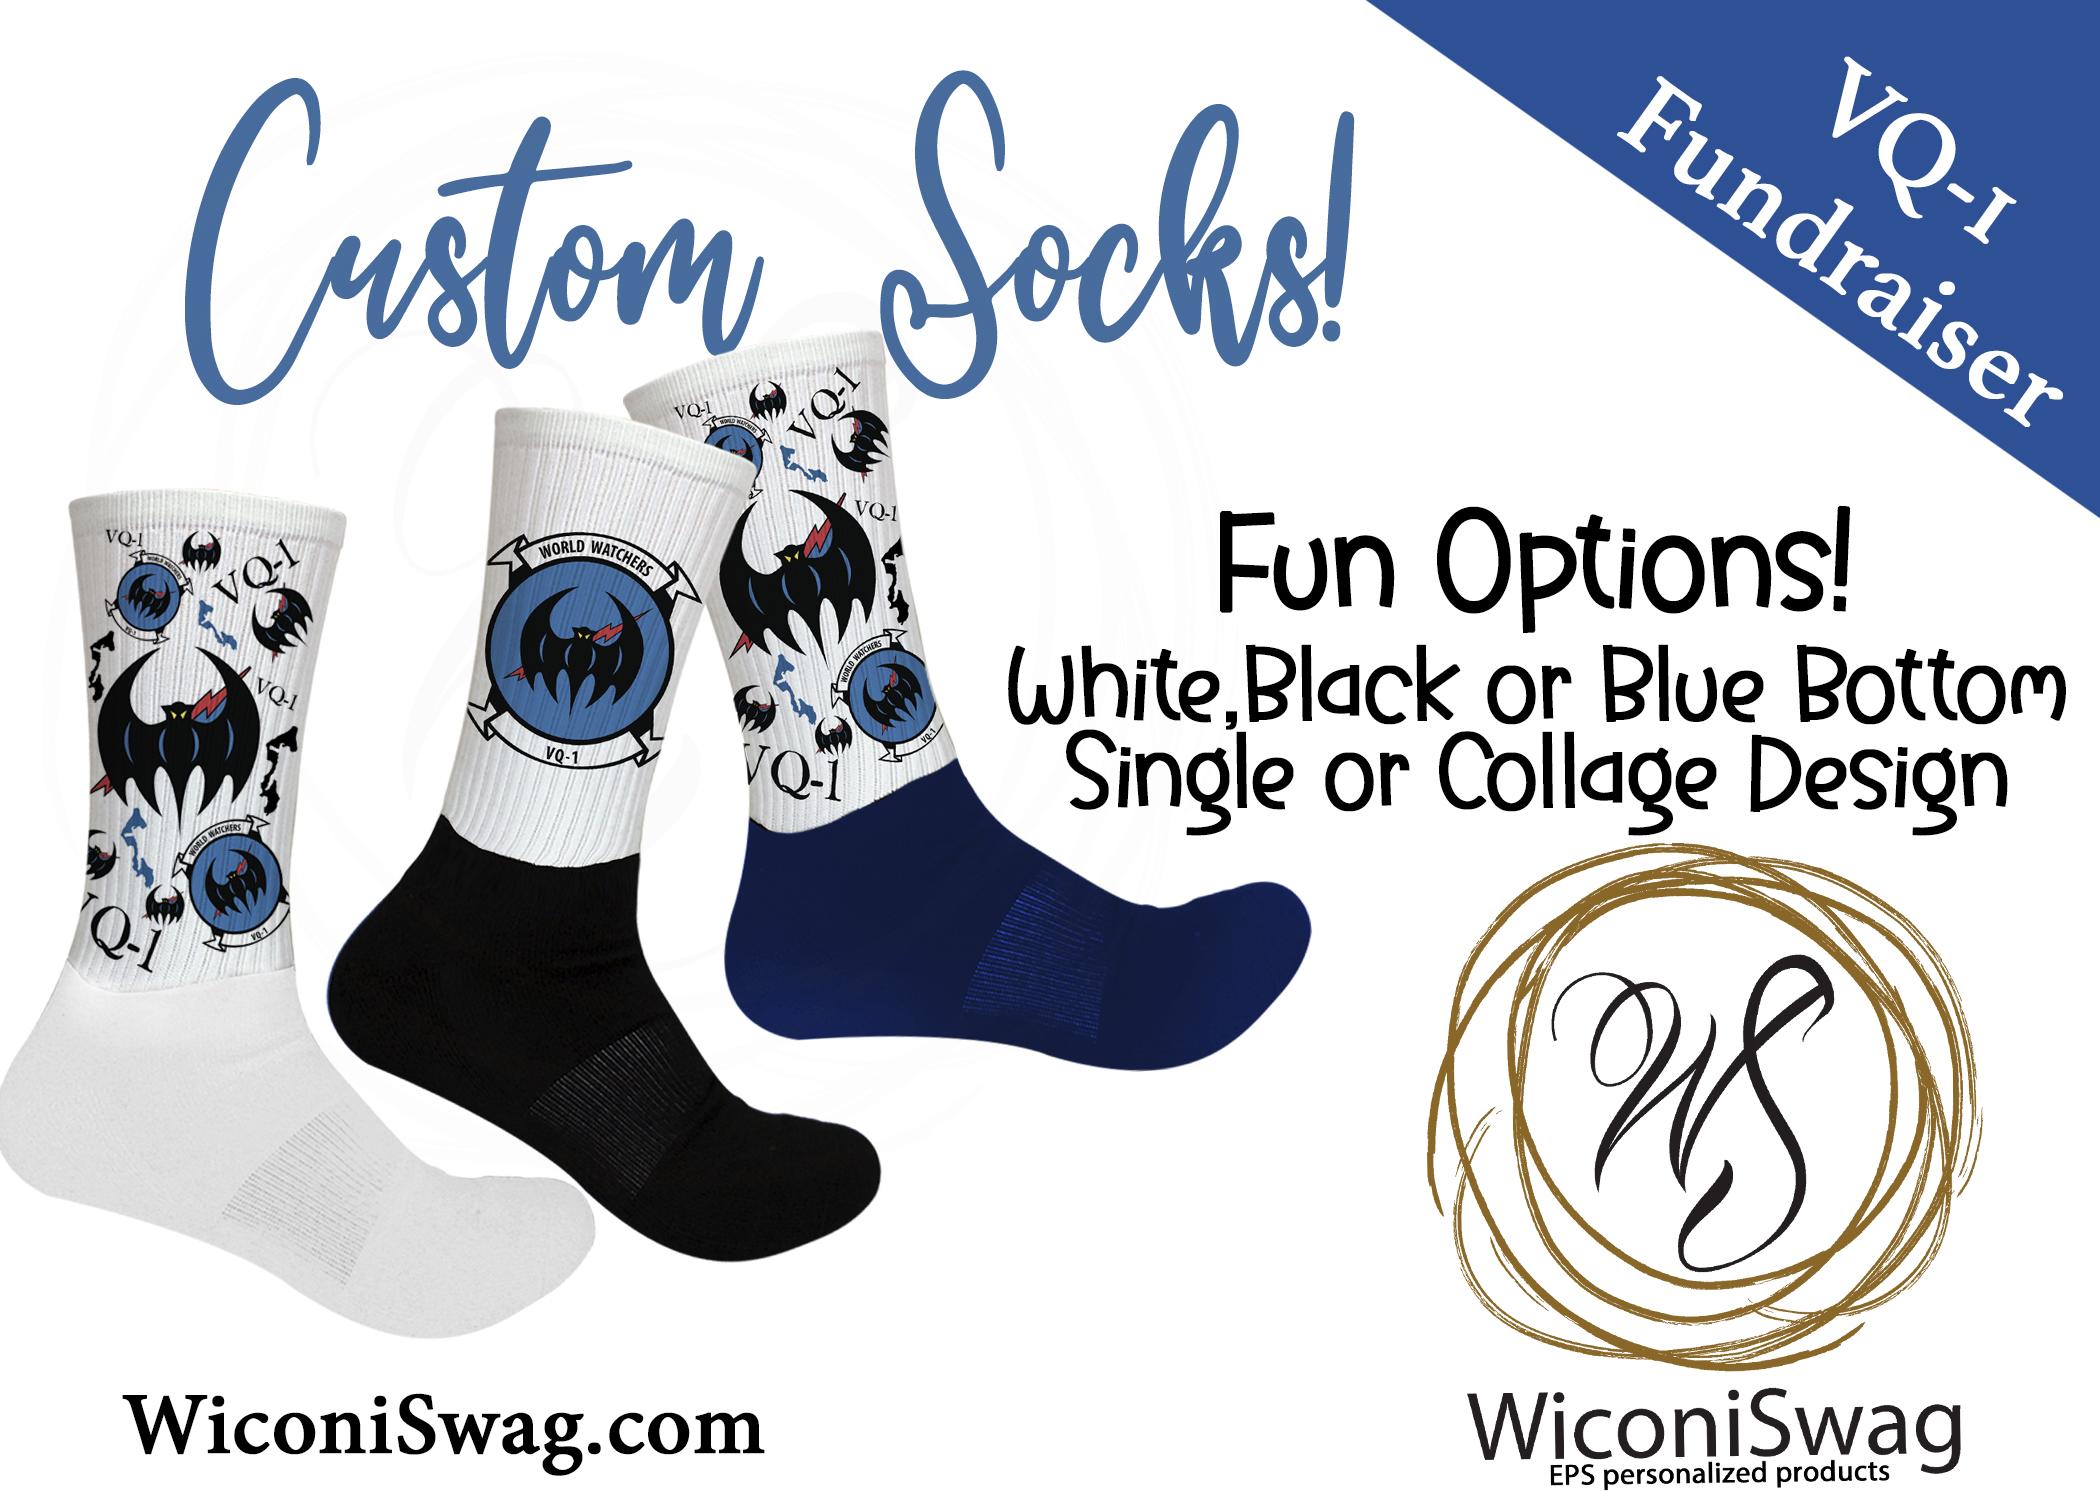 sock swag, vq1, holiday, gift,shop local